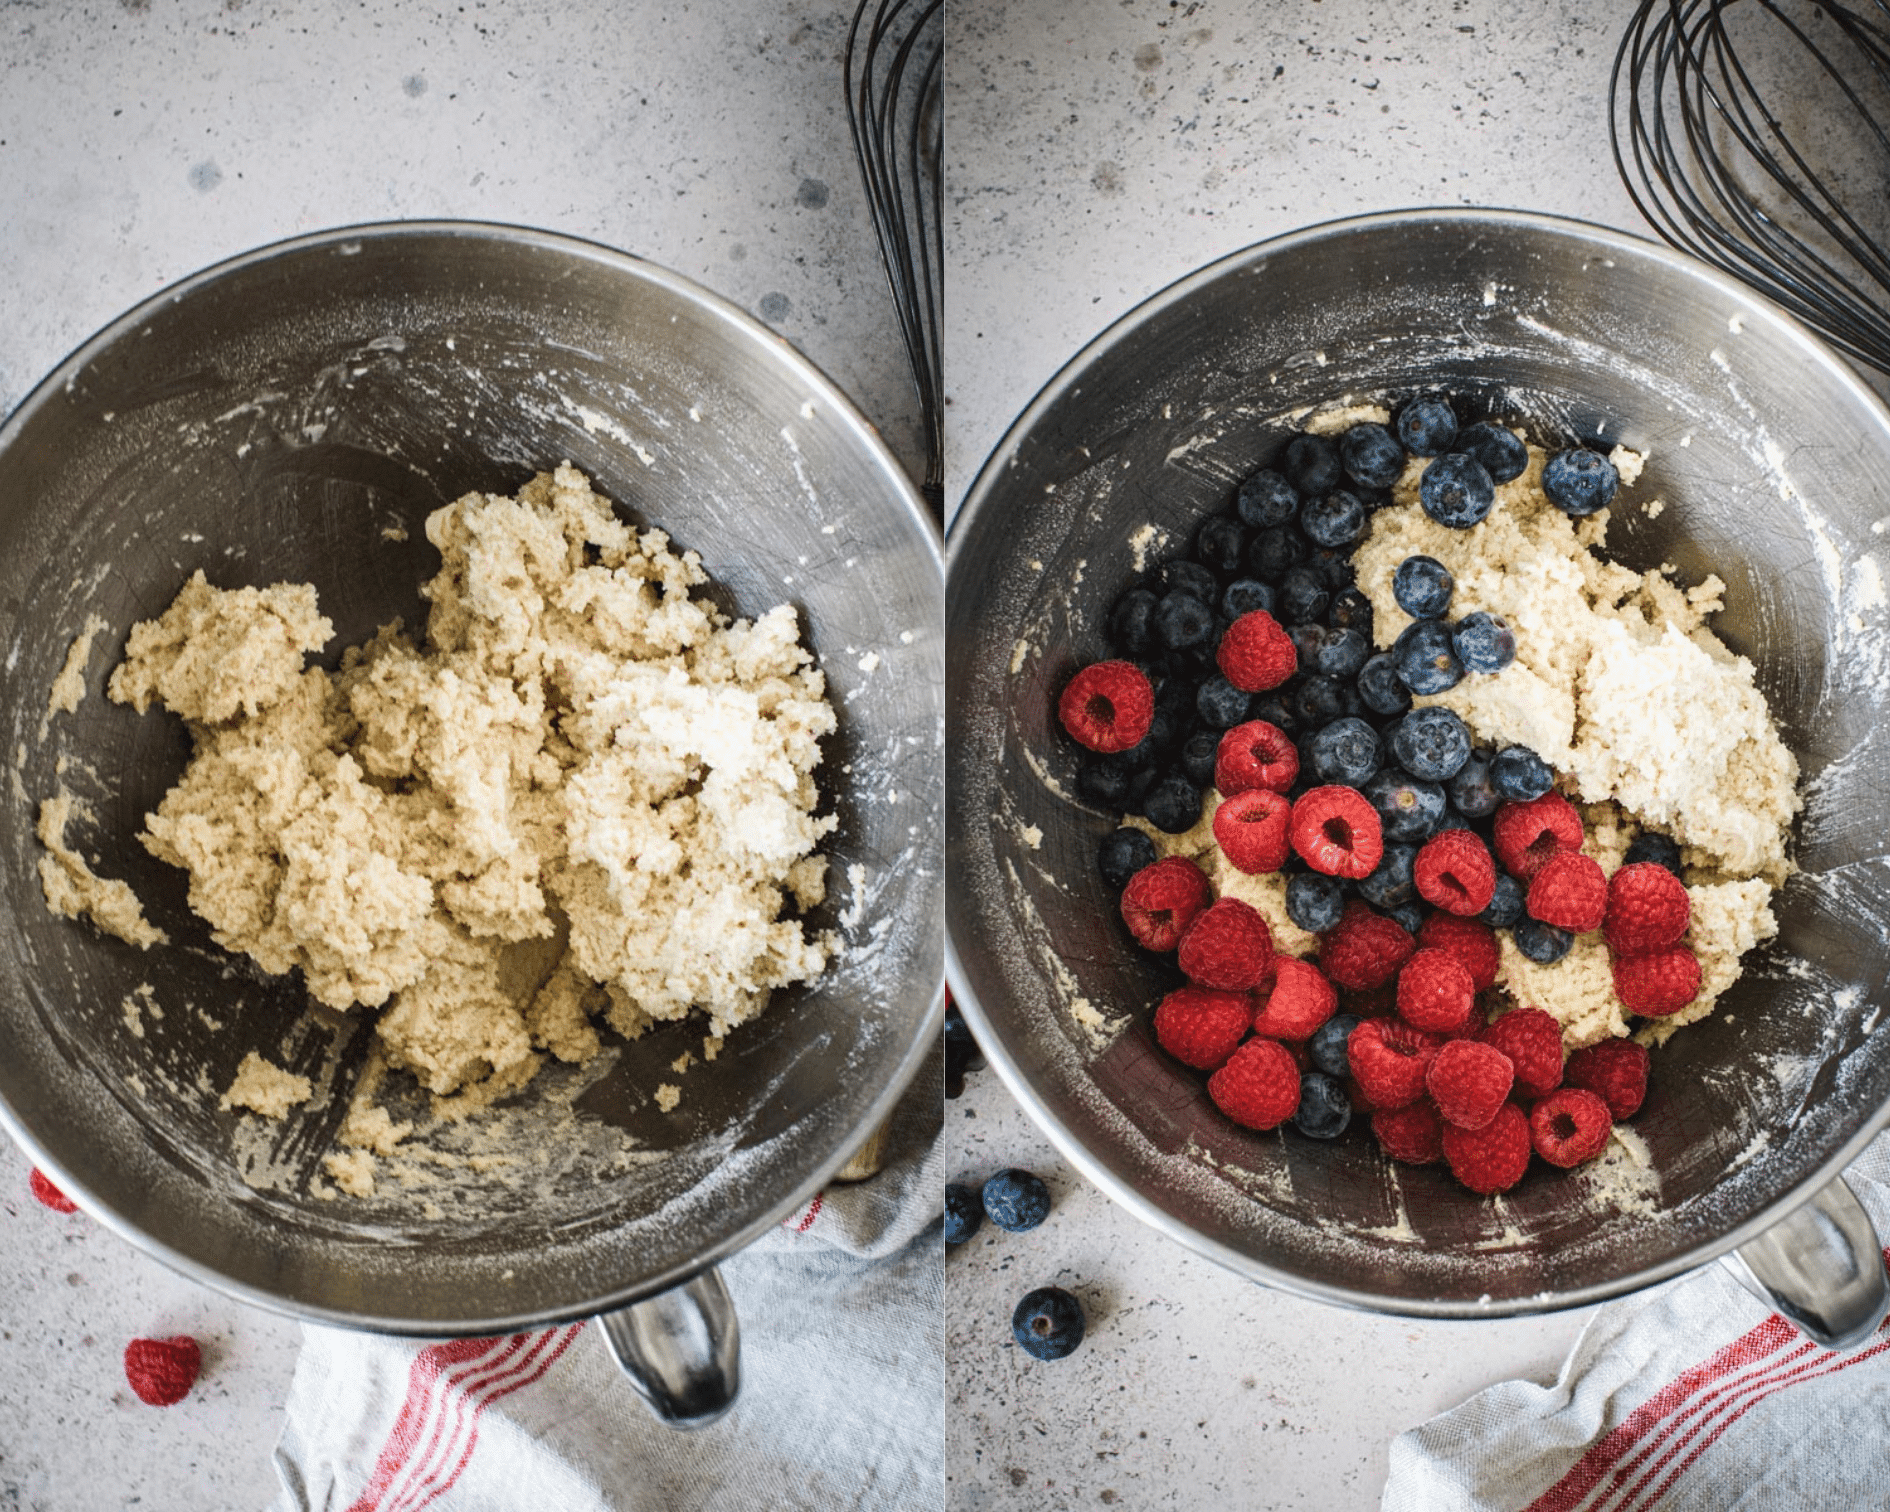 Muffin batter in mixing bowl on left and muffin batter topped with blueberries and raspberries in mixing bowl on right.